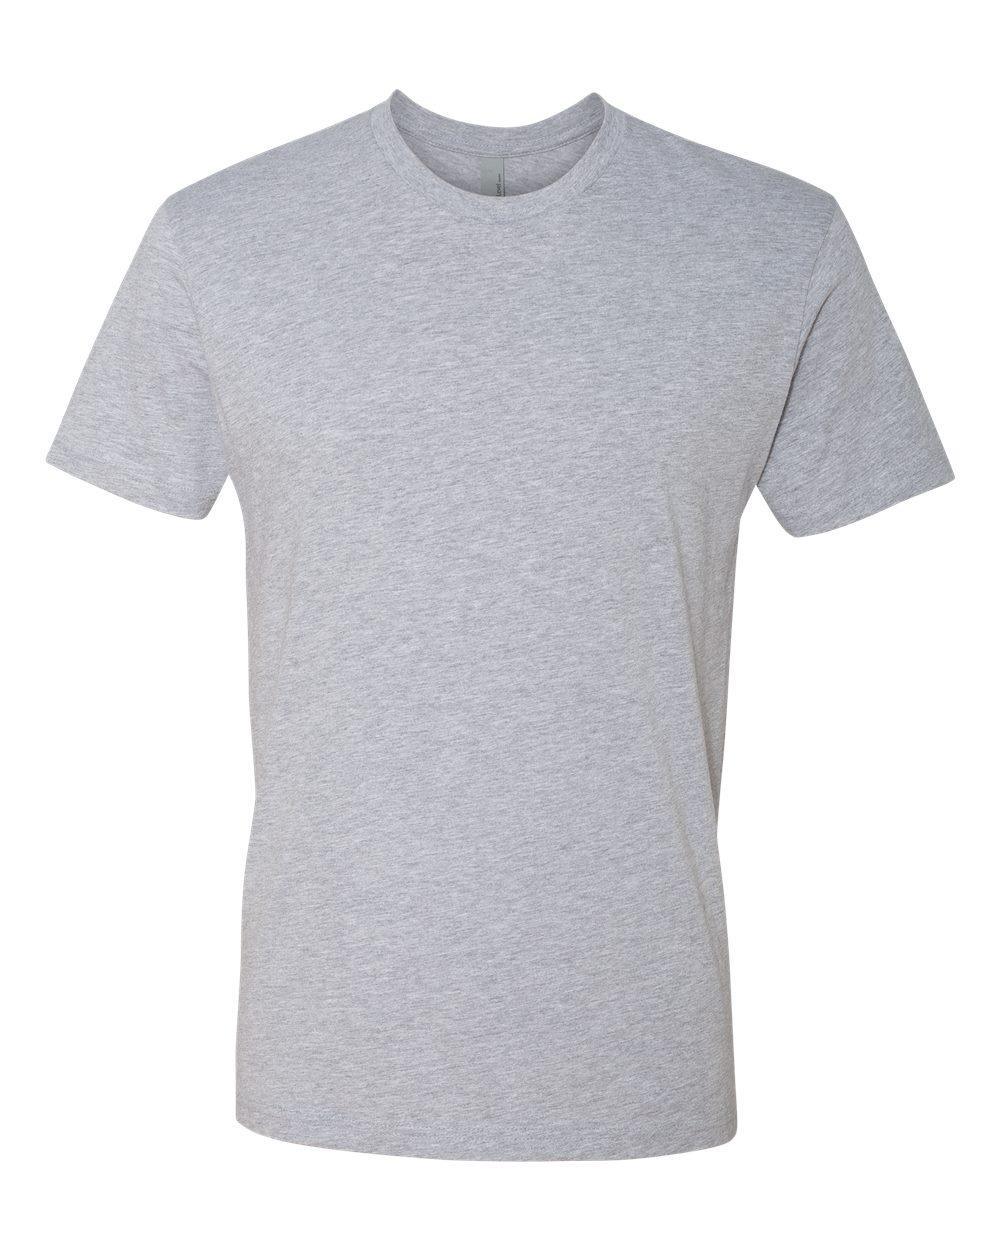 Blank Next Level T-Shirt - Constantly Create Shop